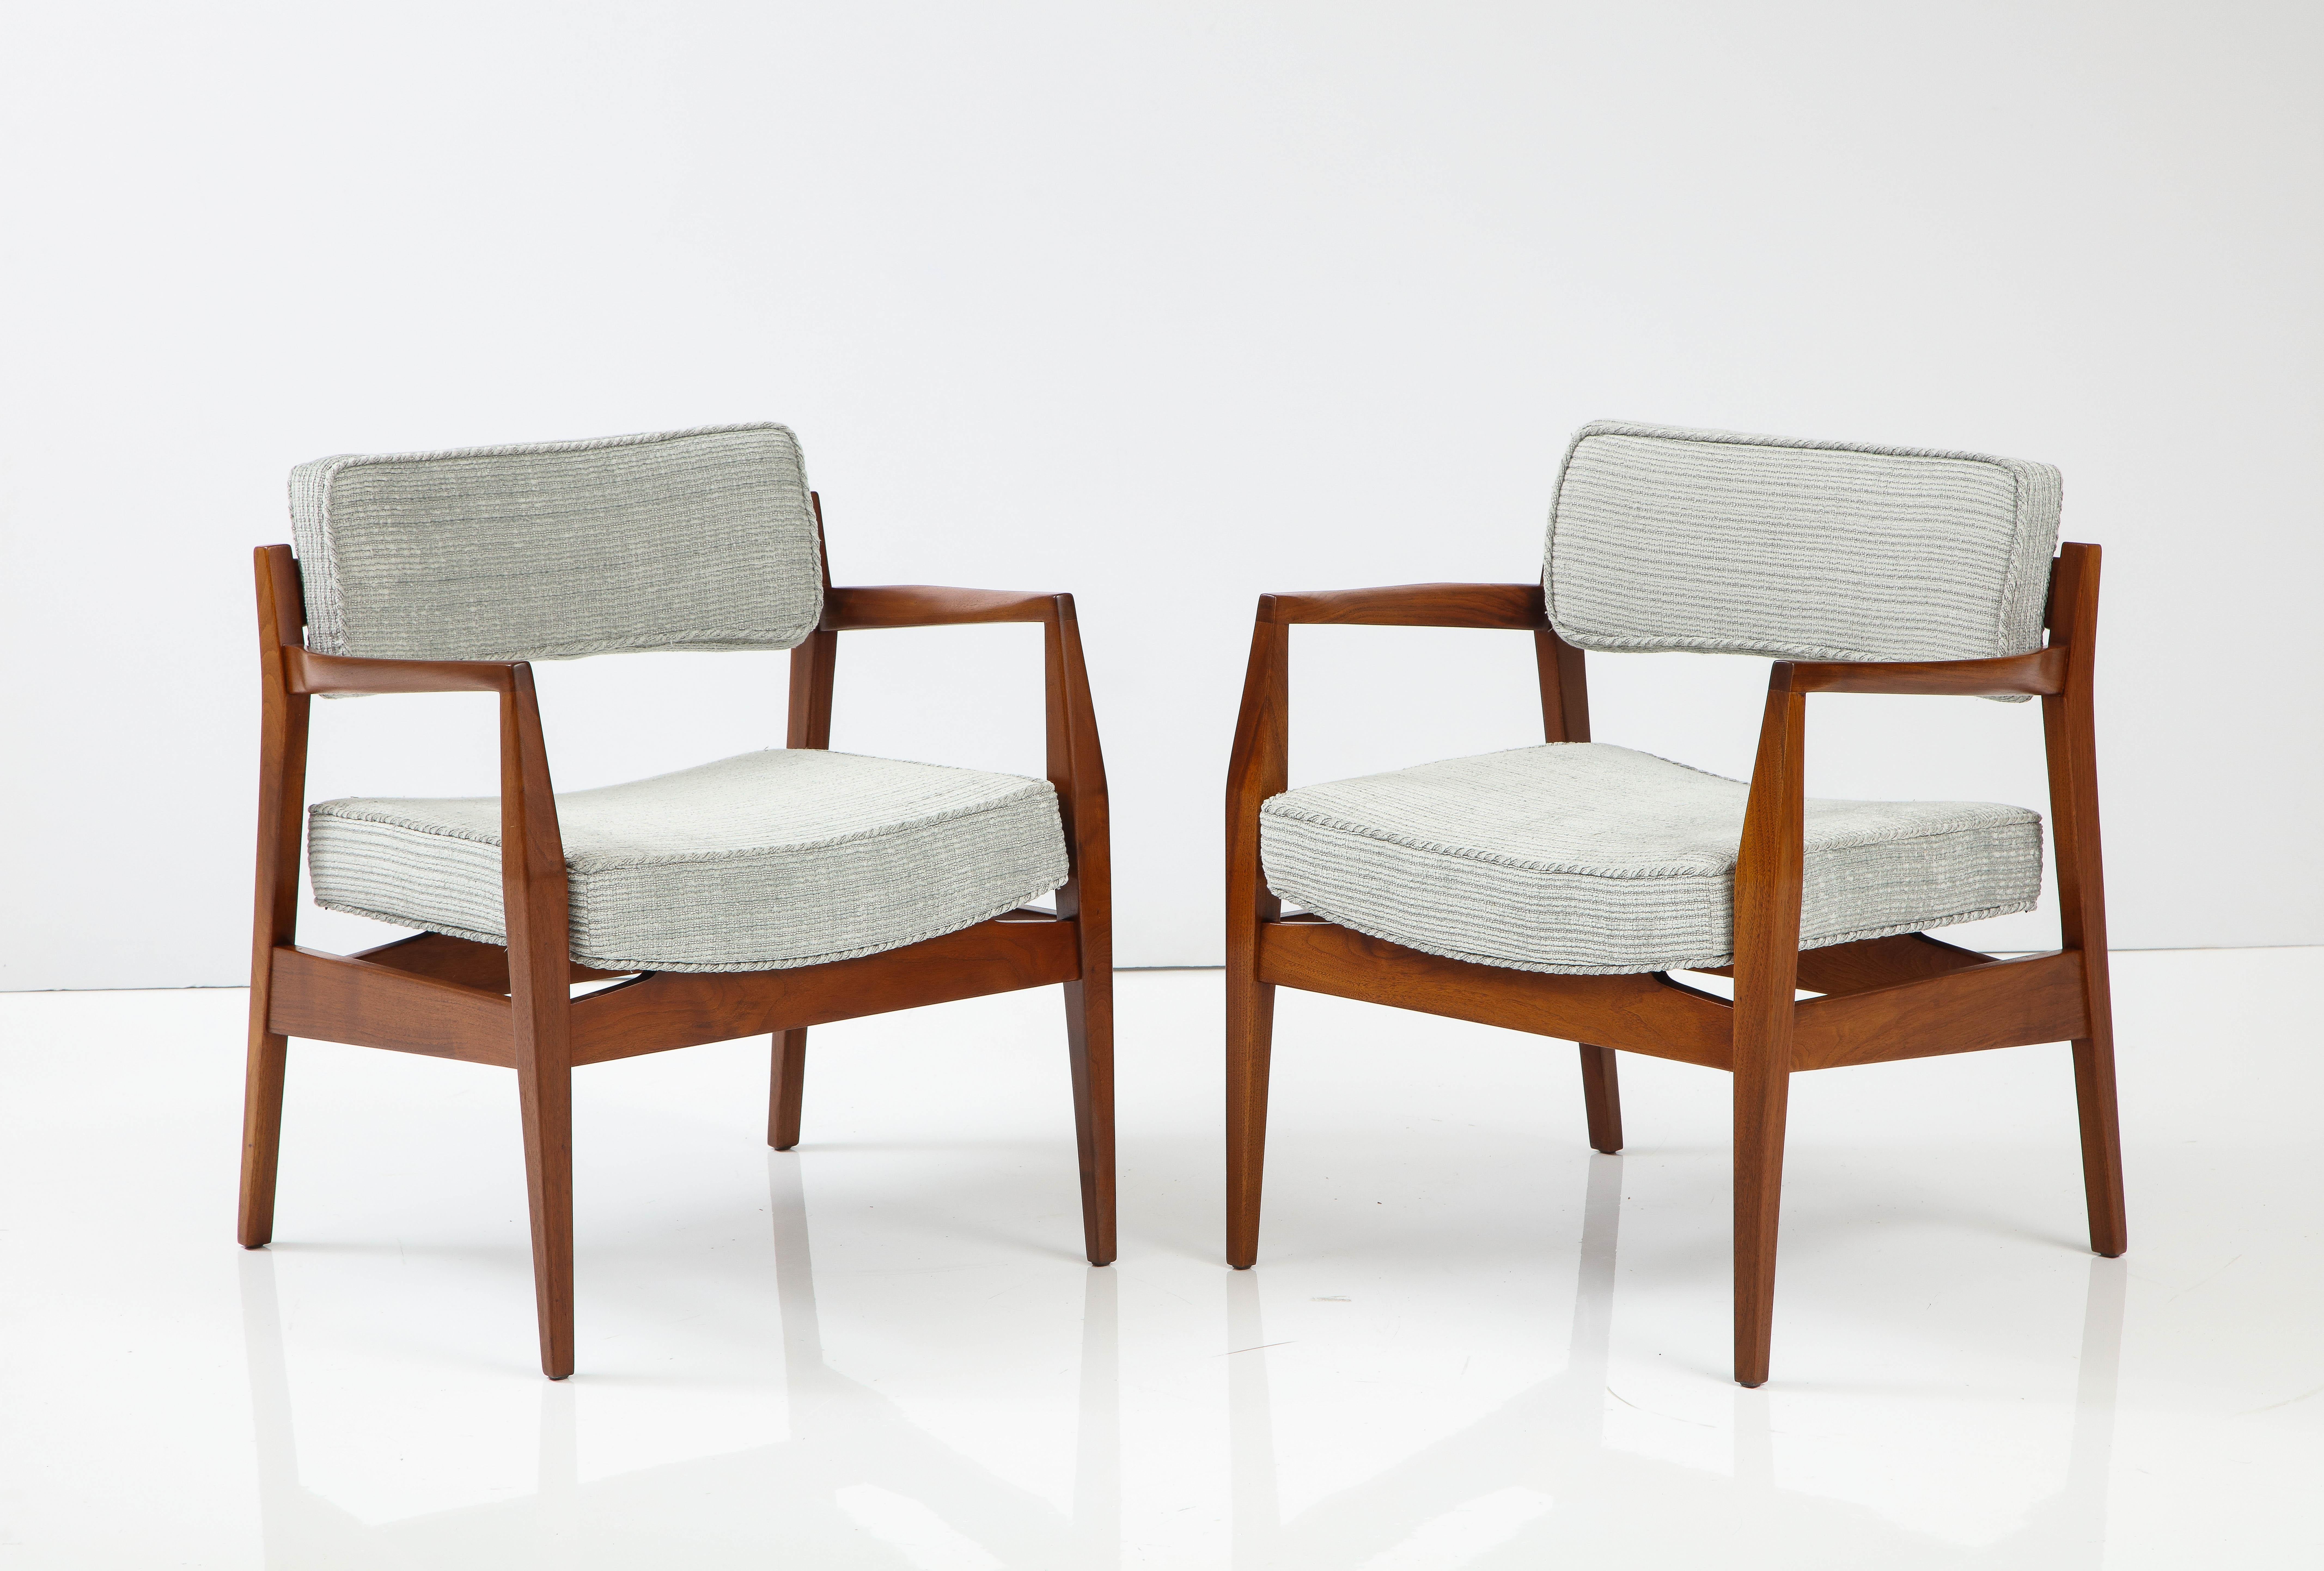 Stunning pair of 1960's Mid-Century Modern solid walnut armchairs designed by Jens Risom, fully restored and re-upholstered.